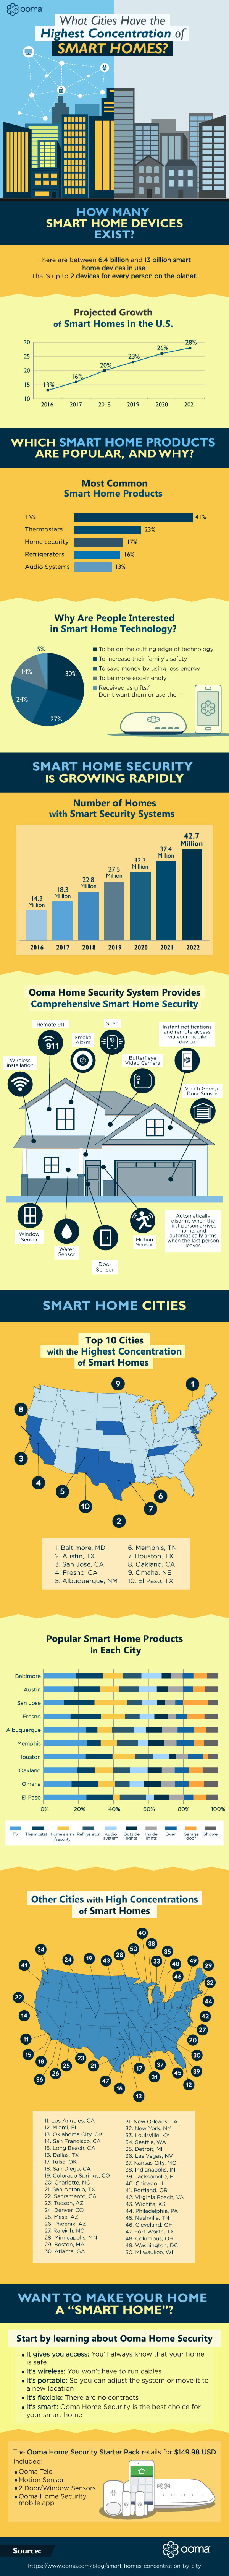 What Cities Have the Highest Concentration of Smart Homes?